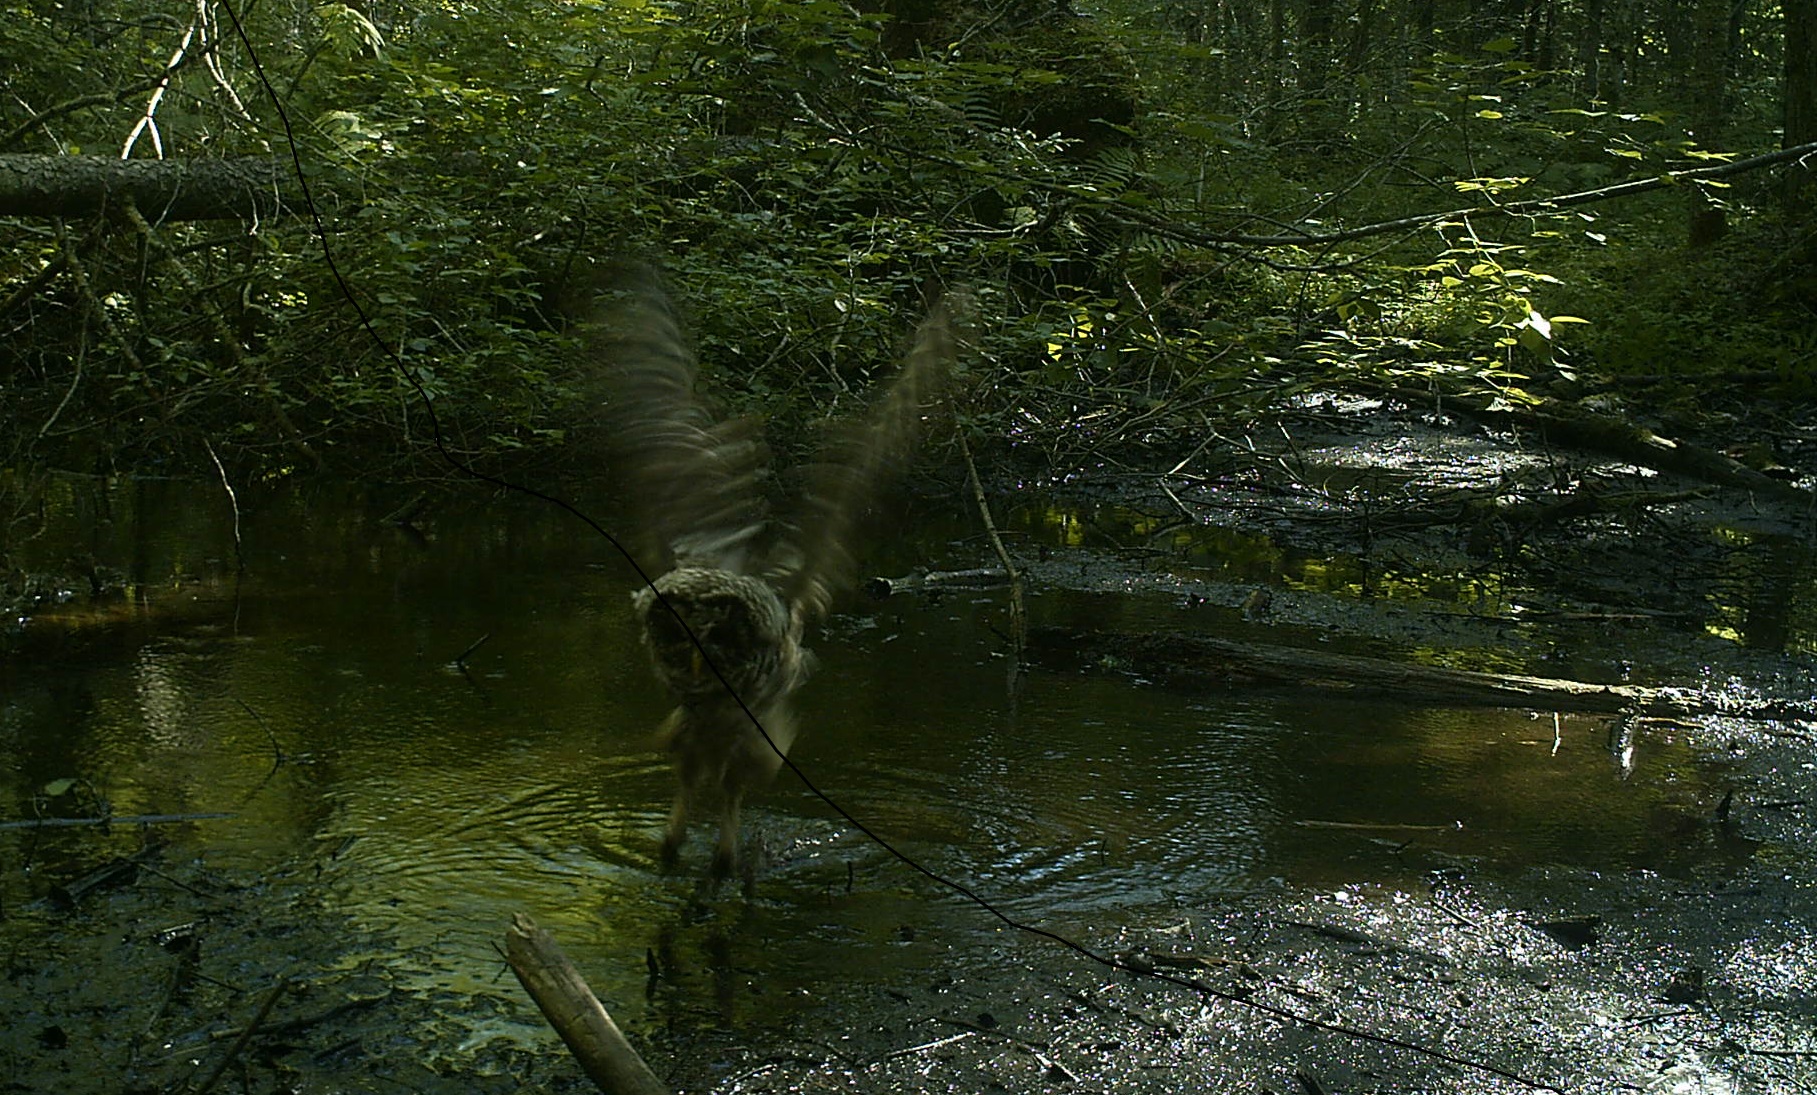 A Barred Owl skims the surface of a vernal pool. Perhaps this owl caught a meal from the pool. Photo credit: Pools and People Trail Camera